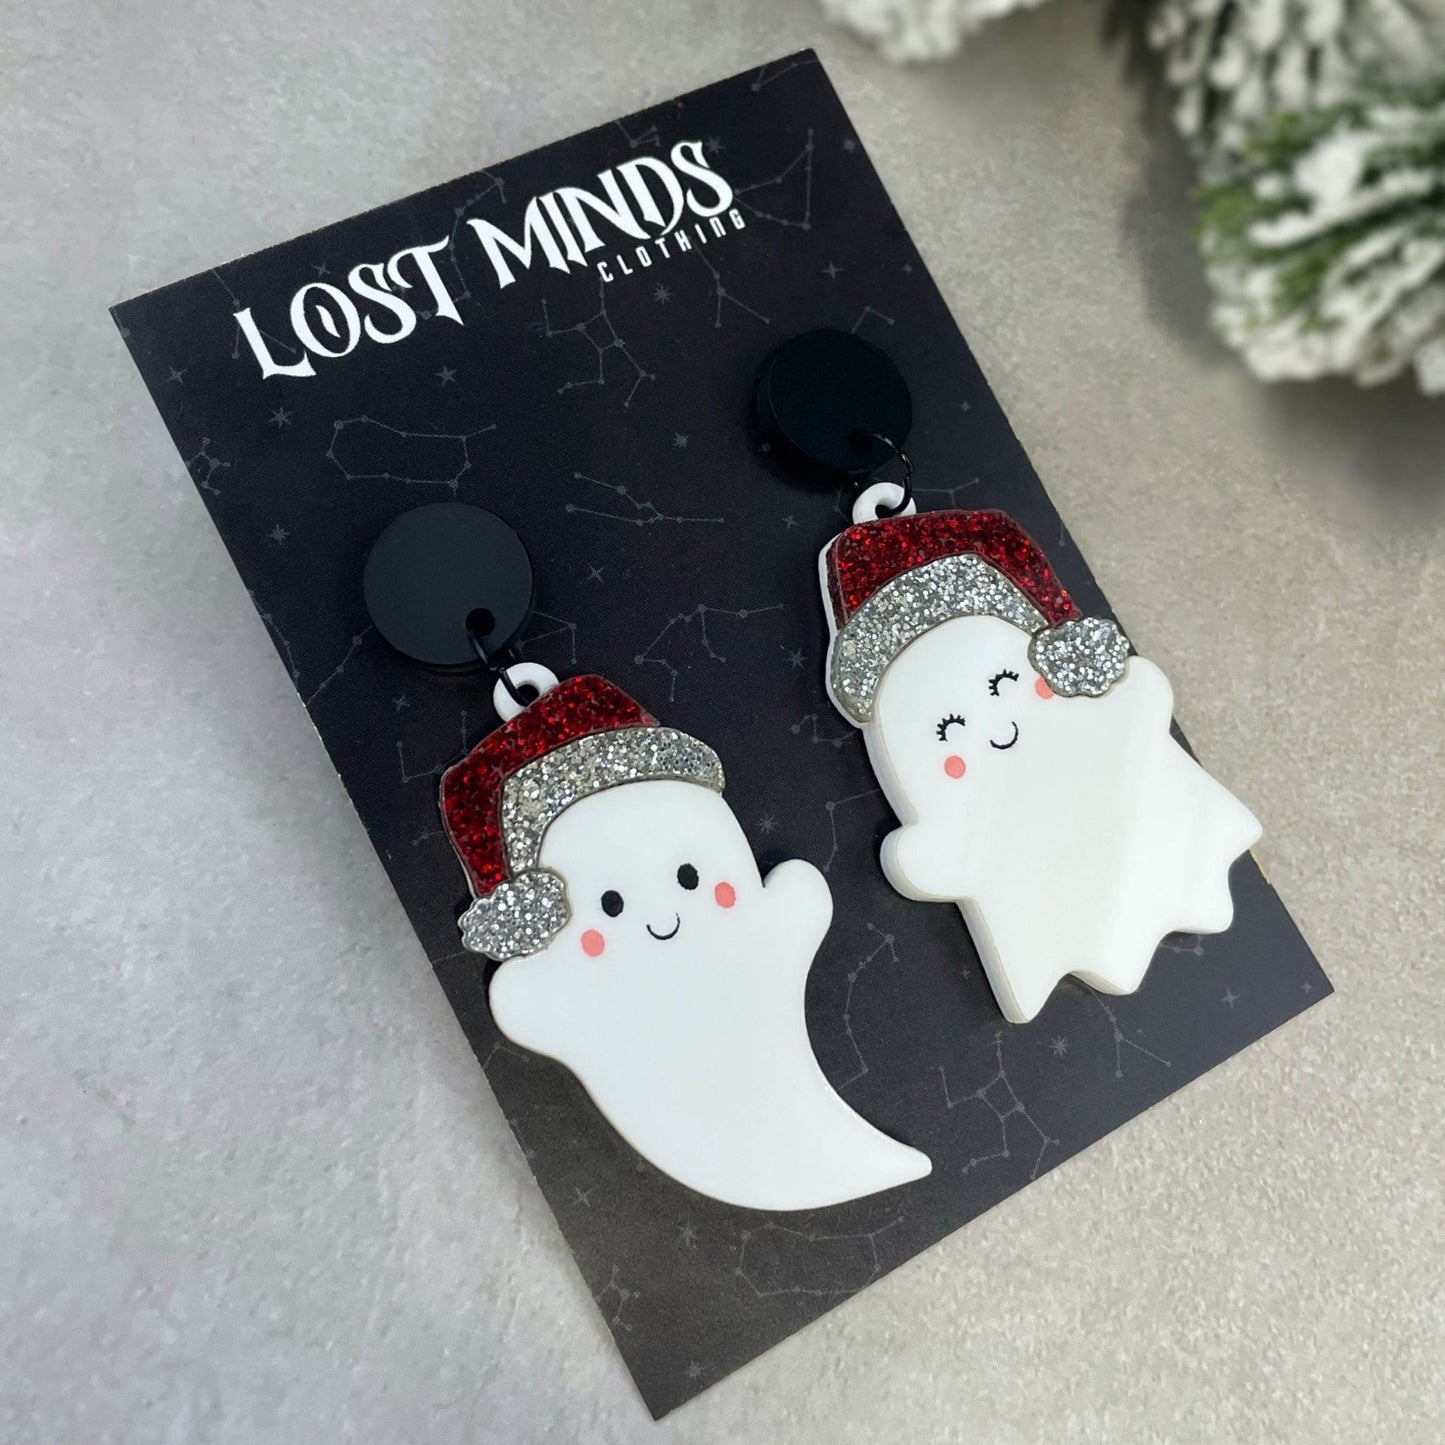 The Ghosts of Christmas Earrings - Lost Minds Clothing